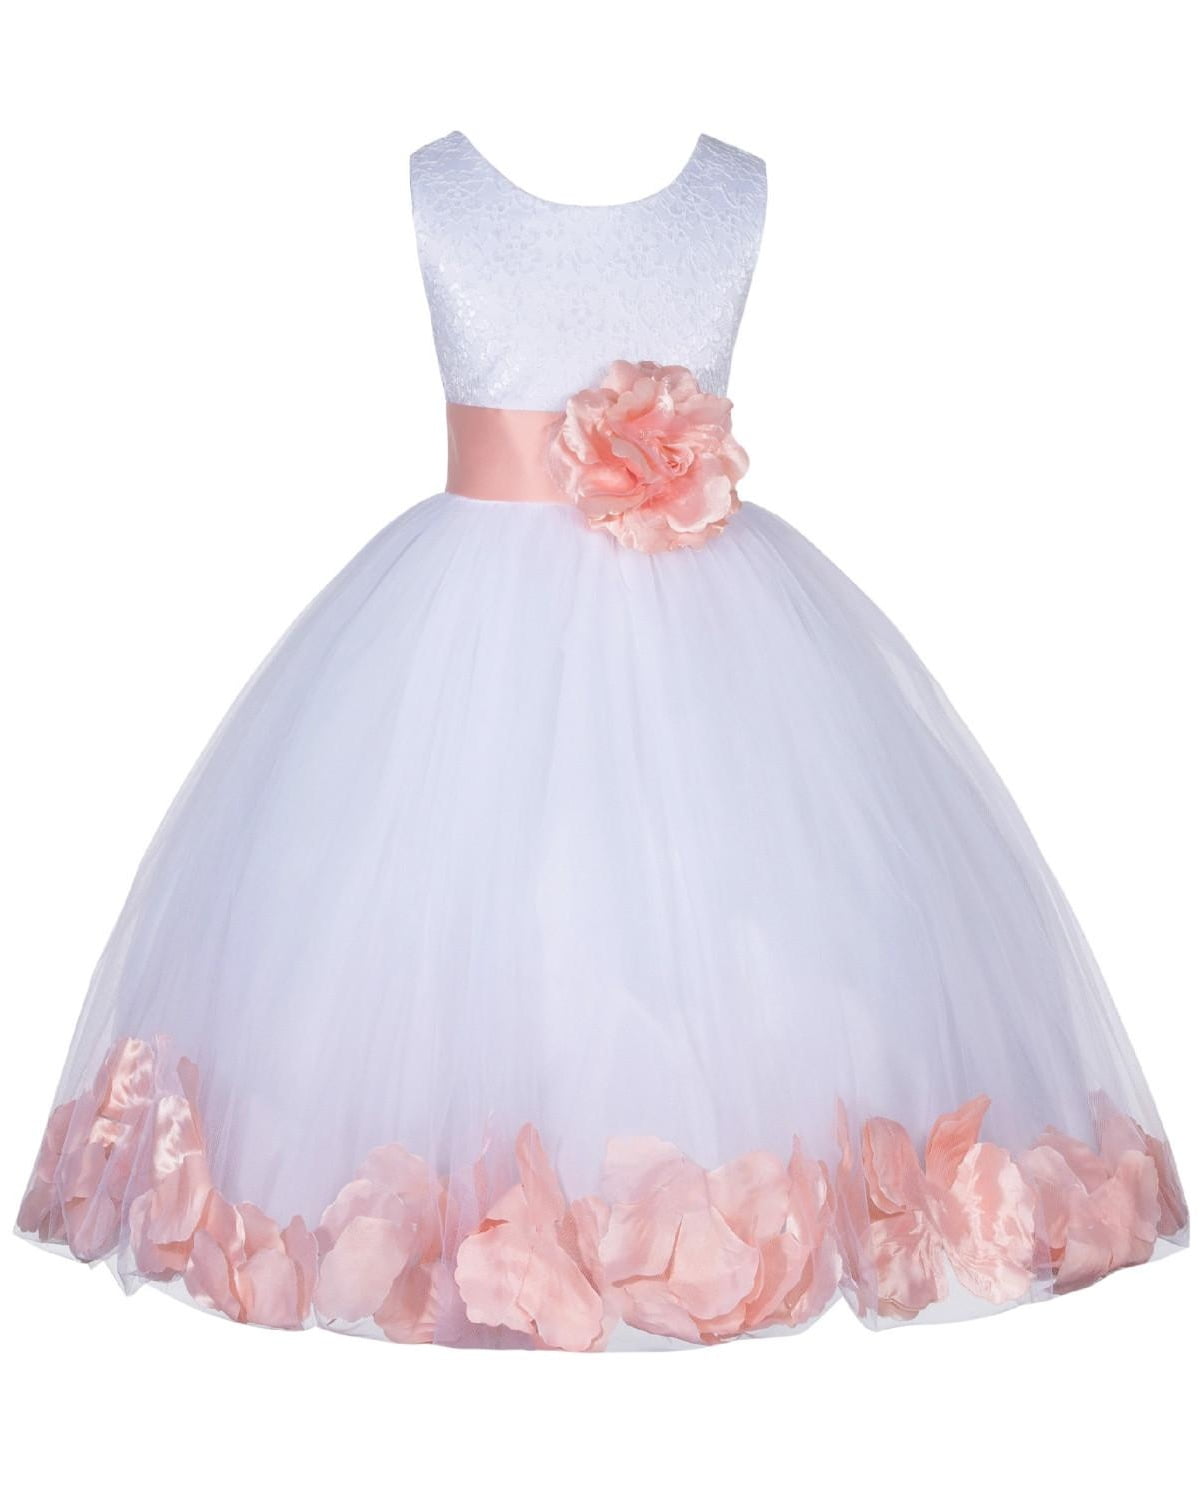 Flower Toddler Girls Summer Easter Dress Ceremony Party Pageant Holiday Outfits